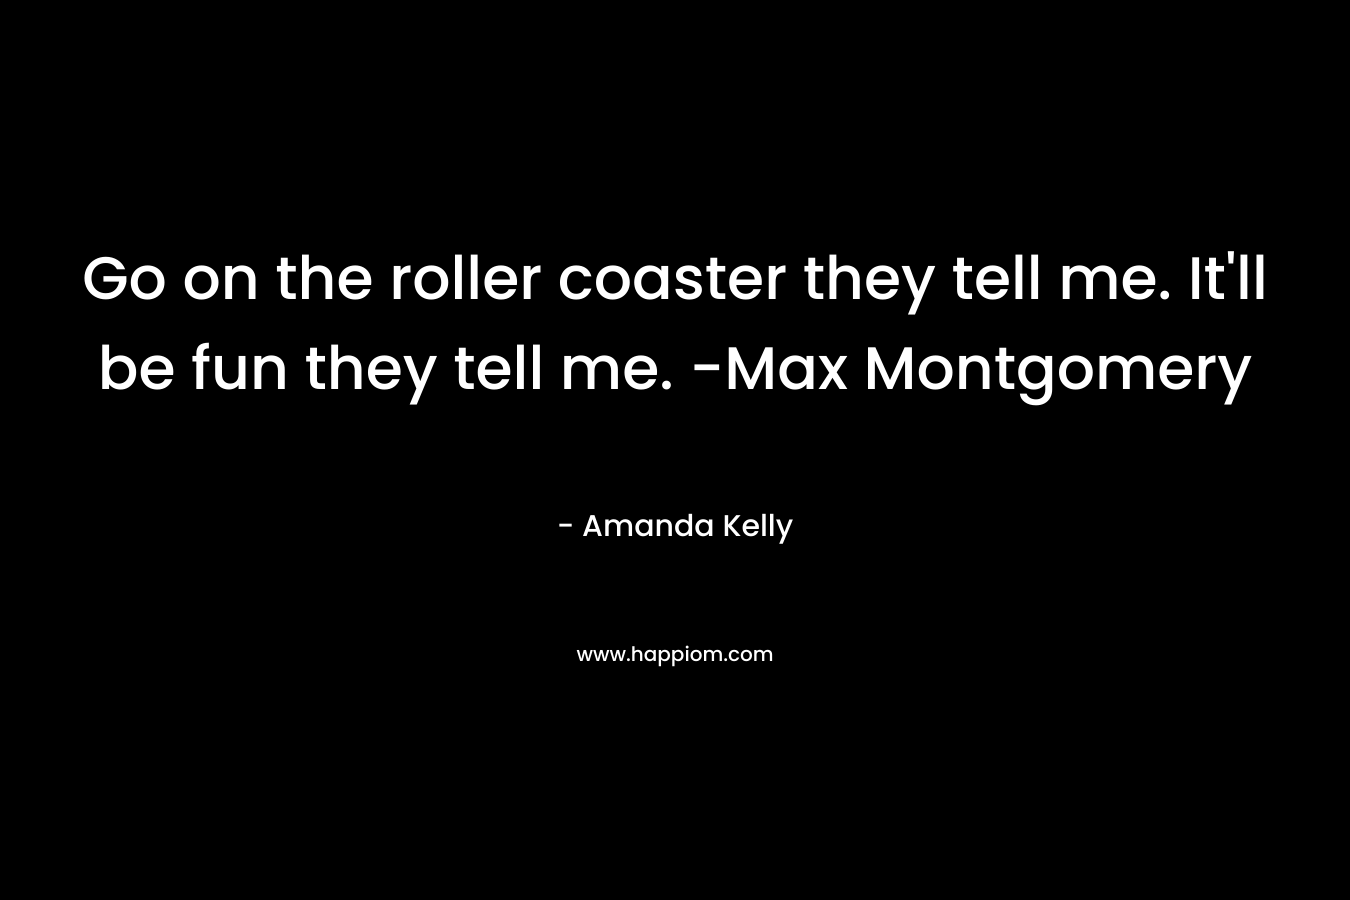 Go on the roller coaster they tell me. It’ll be fun they tell me. -Max Montgomery – Amanda Kelly